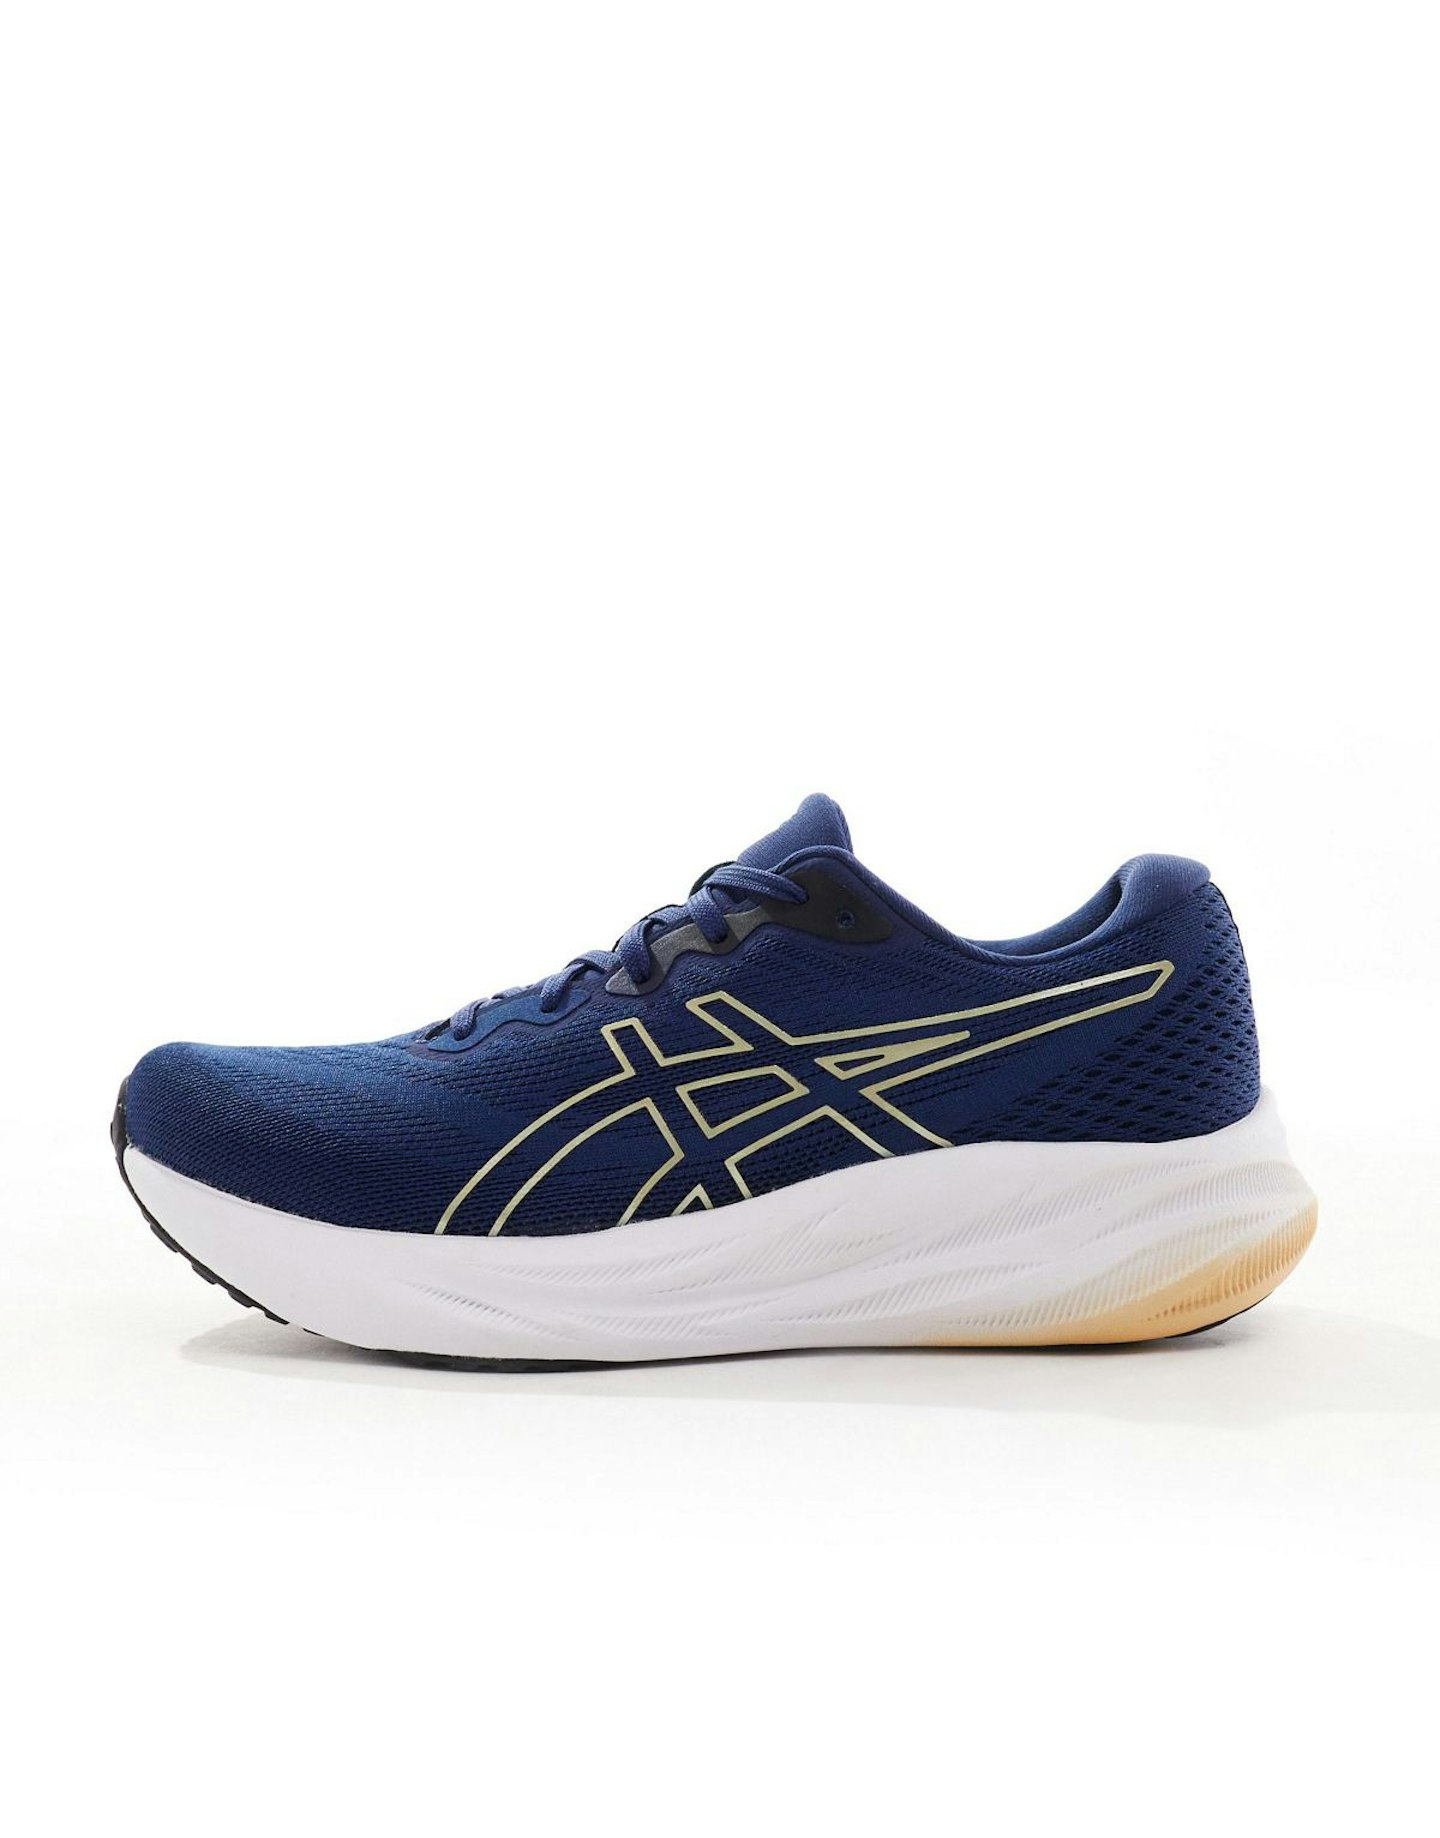  Asics Gel-Pulse 15 running trainers in blue expanse and gold